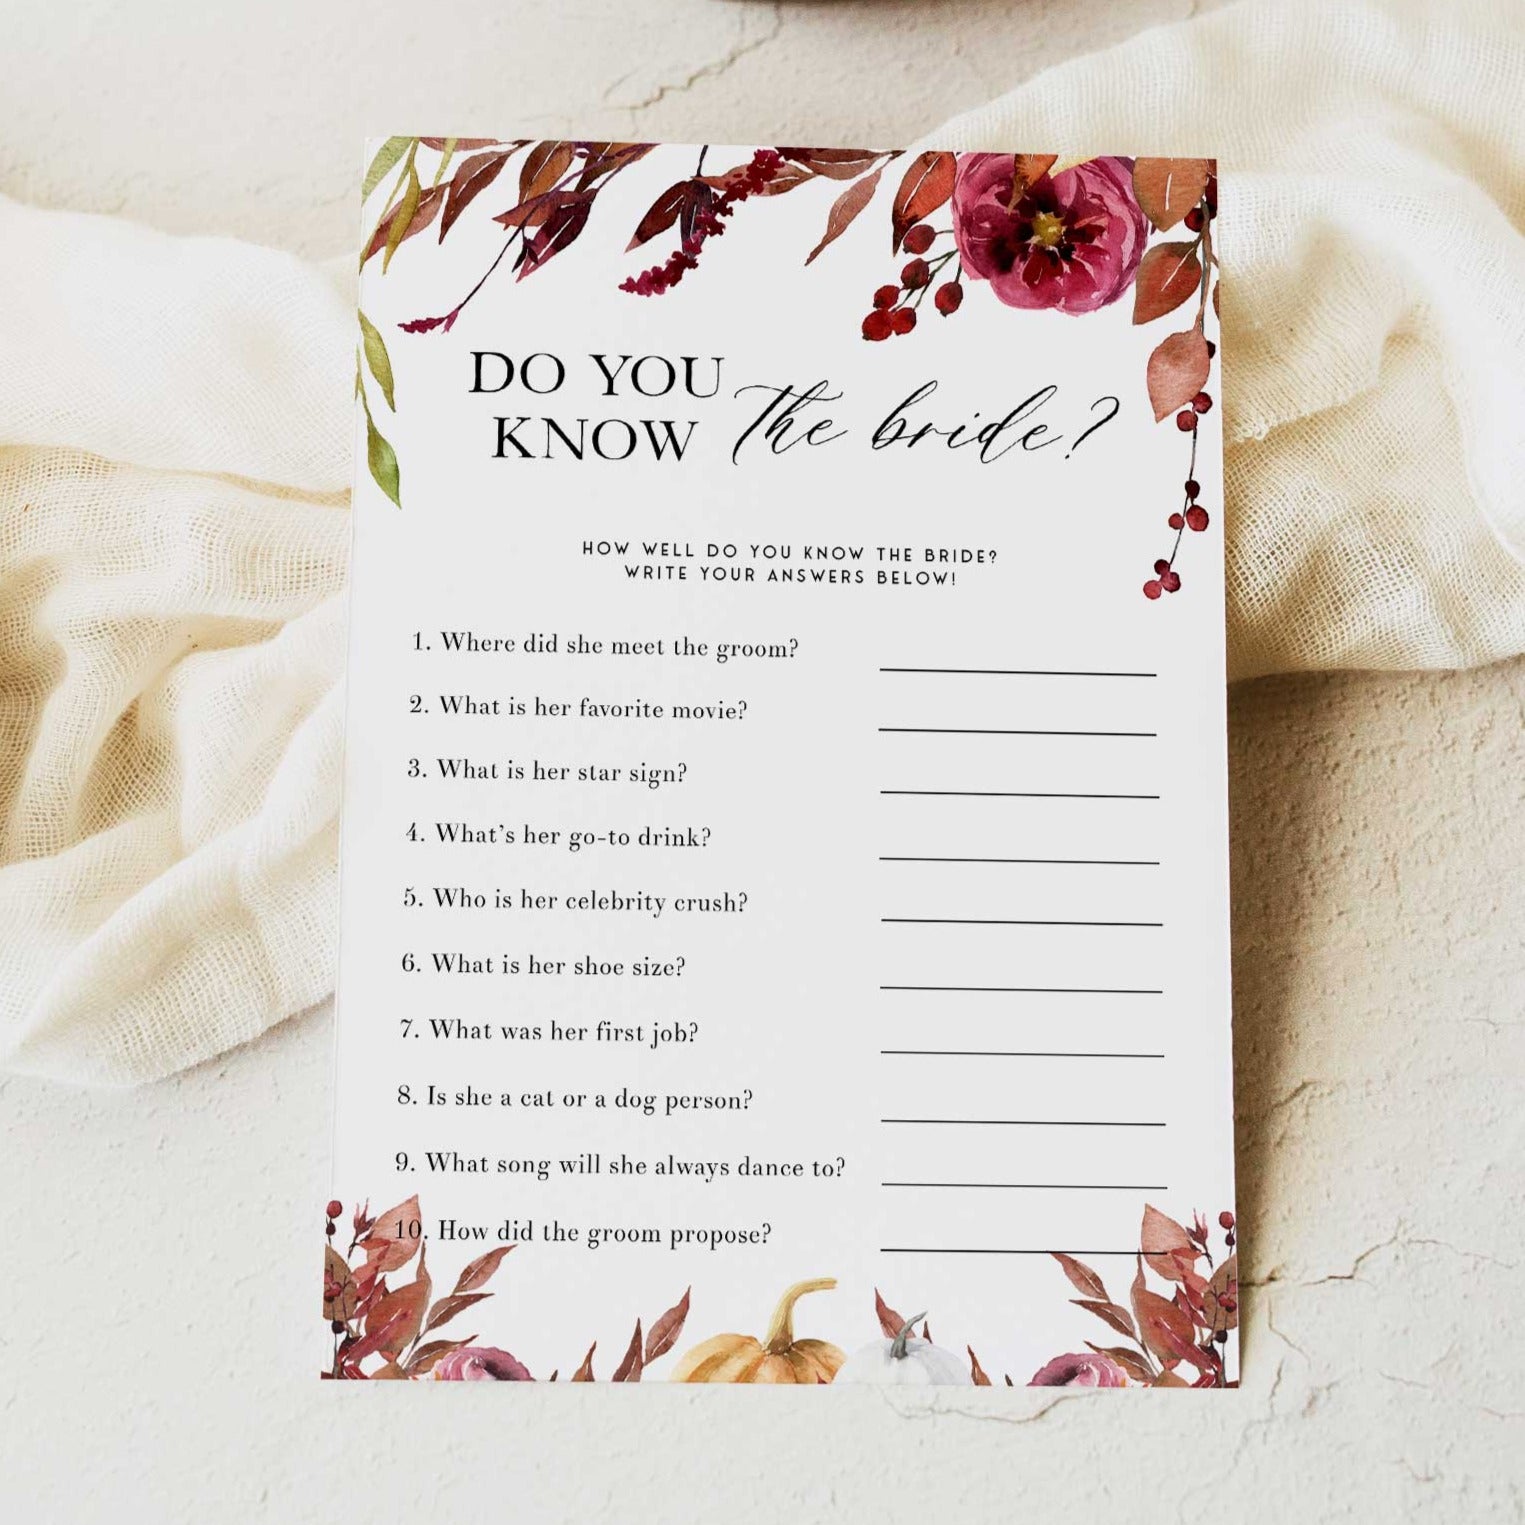 Fully editable and printable do you know the bride game with a Fall design. Perfect for a fall floral bridal shower